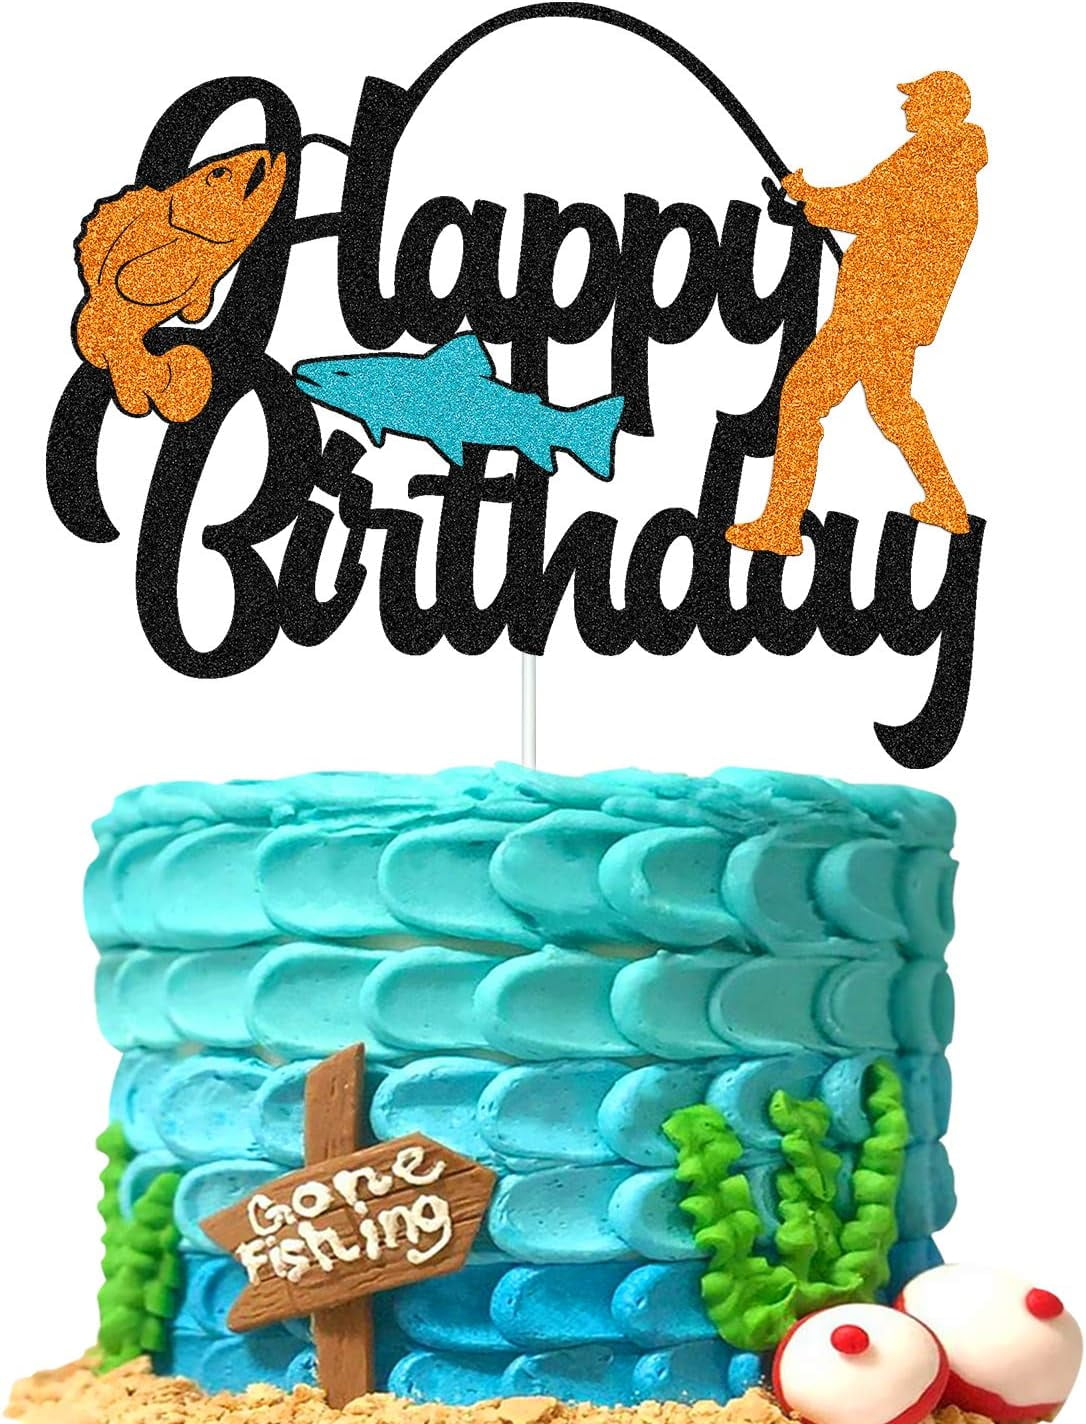 Fish Cake Topper Happy Birthday Sign Cake Decorations for Man Kids Boy  Fisherman Gone Fishing Themed Birthday Party Supplies Black Glitter Decor